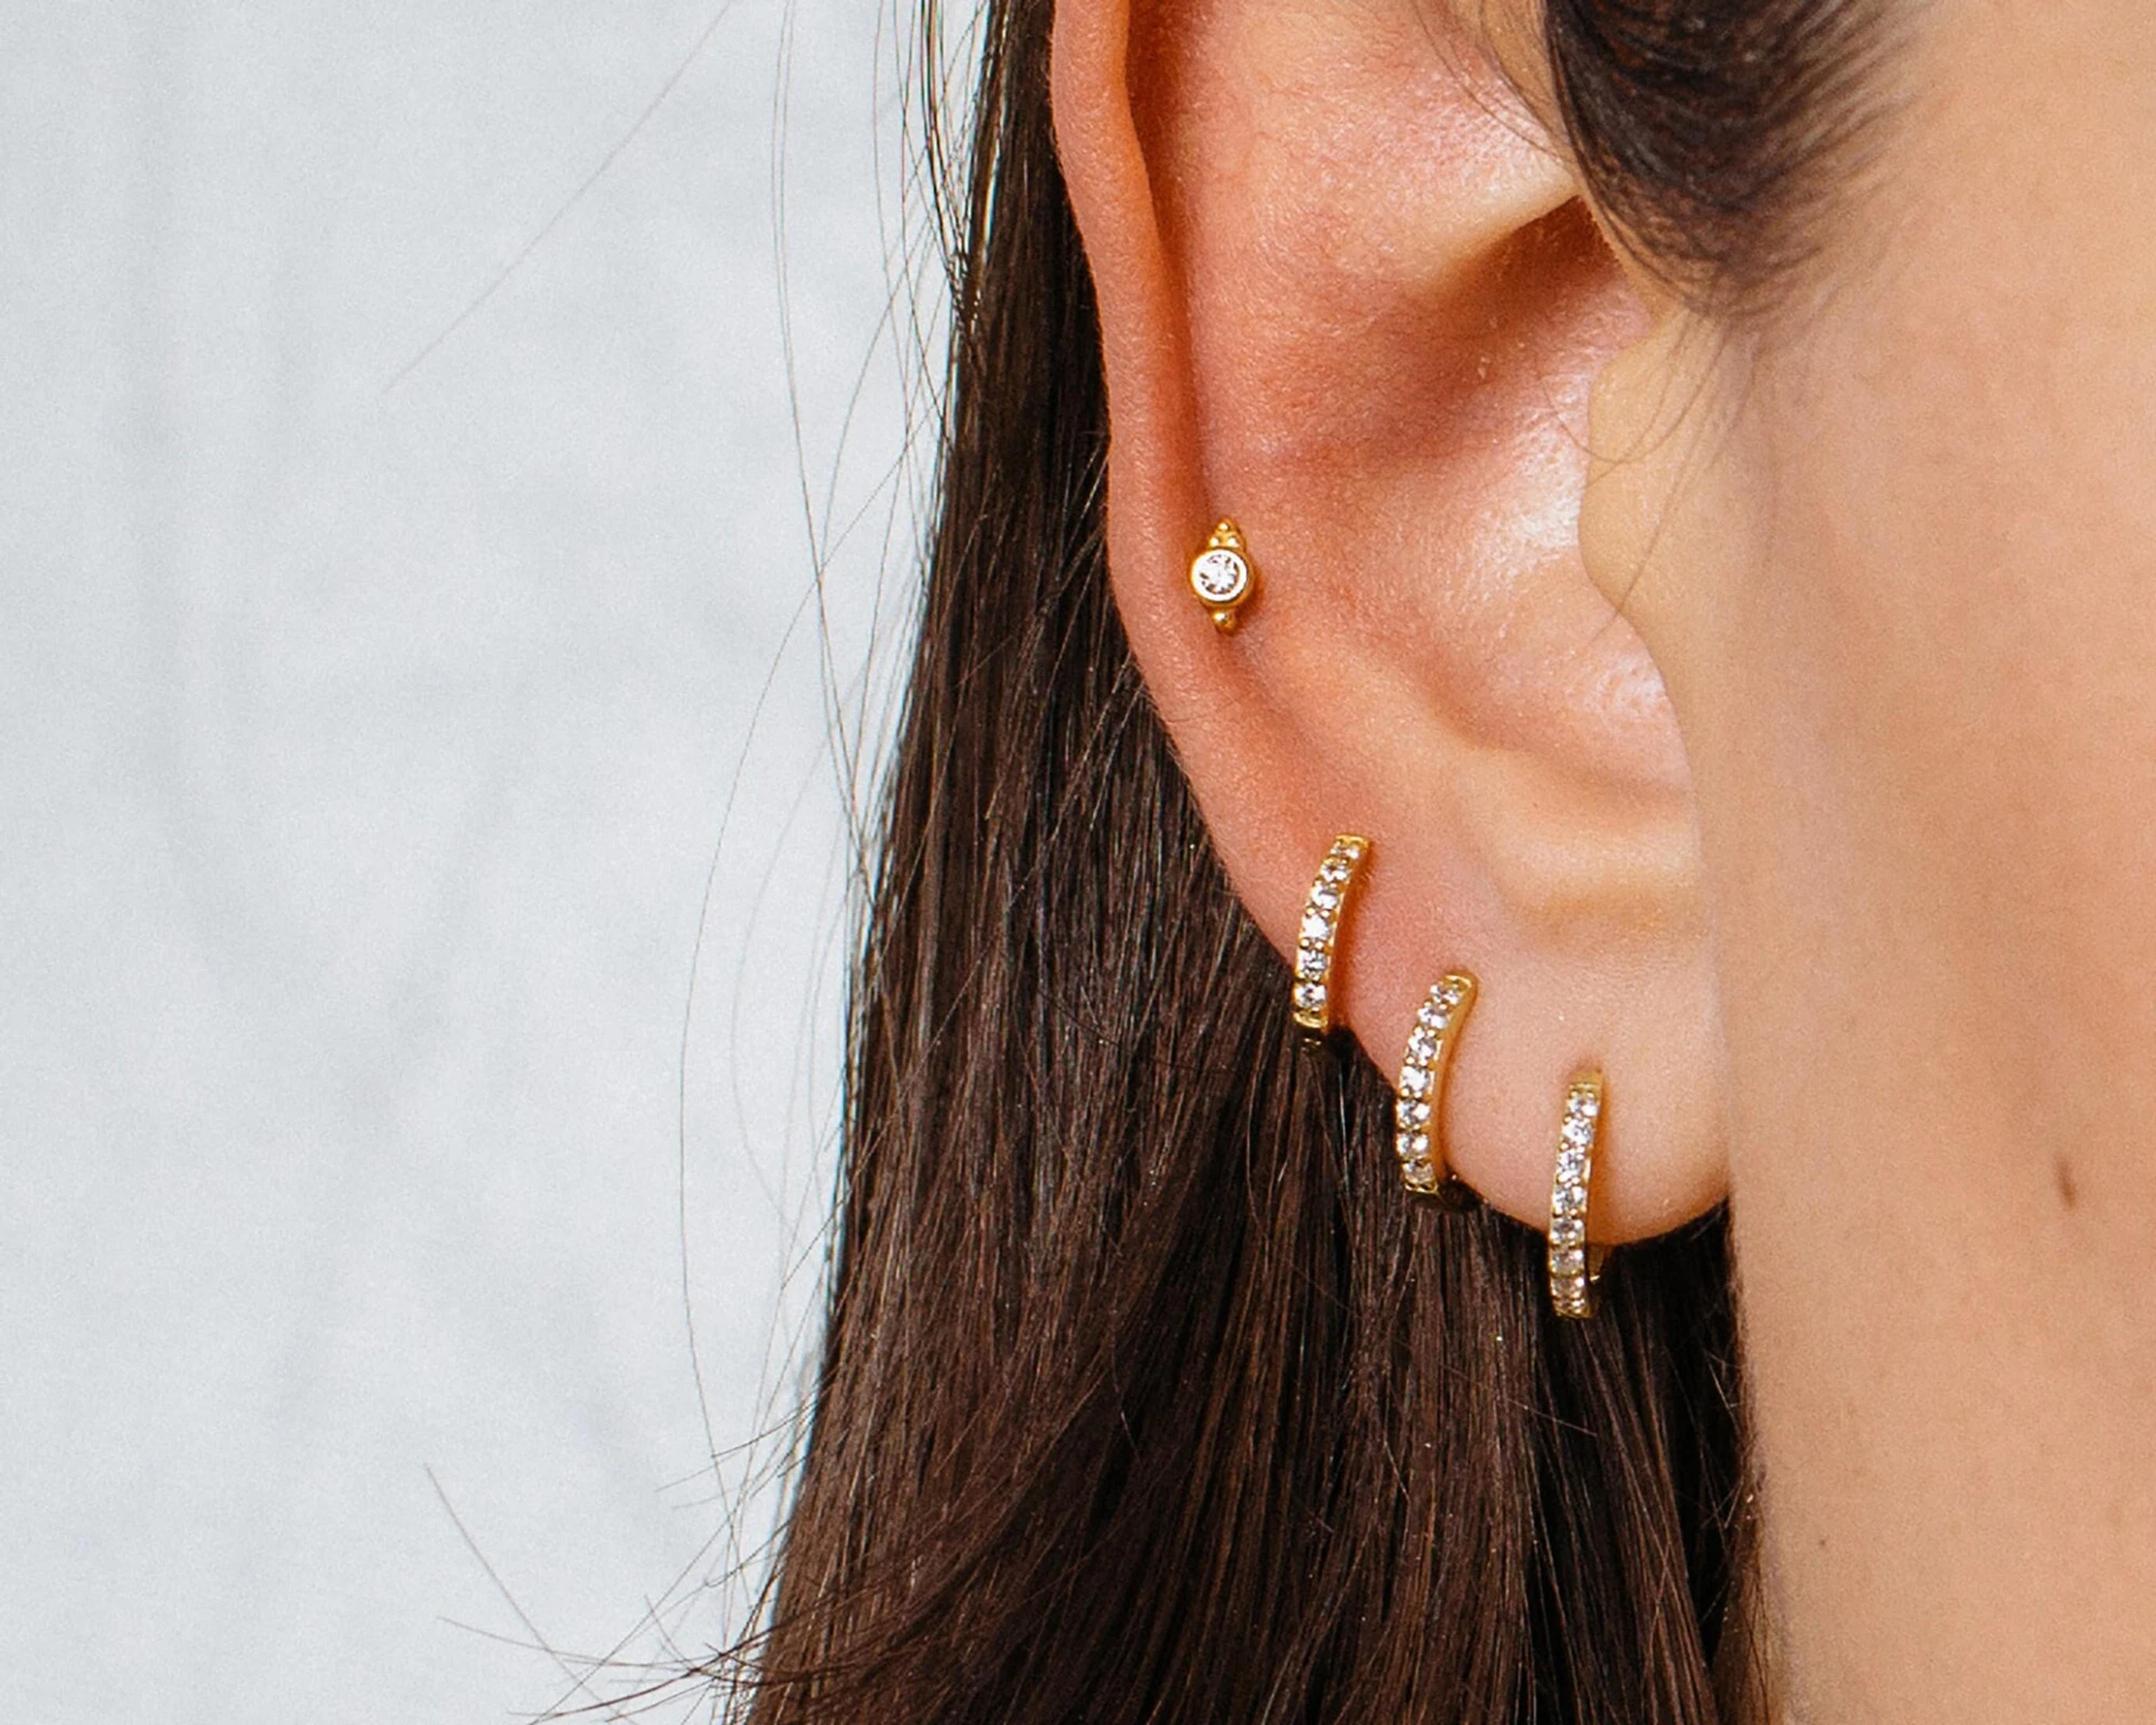 20G/18G/16G Tiny Cartilage Gold Stud Earrings • dainty tragus earrings • small conch earrings • cartilage • tiny gold studs • helix stud